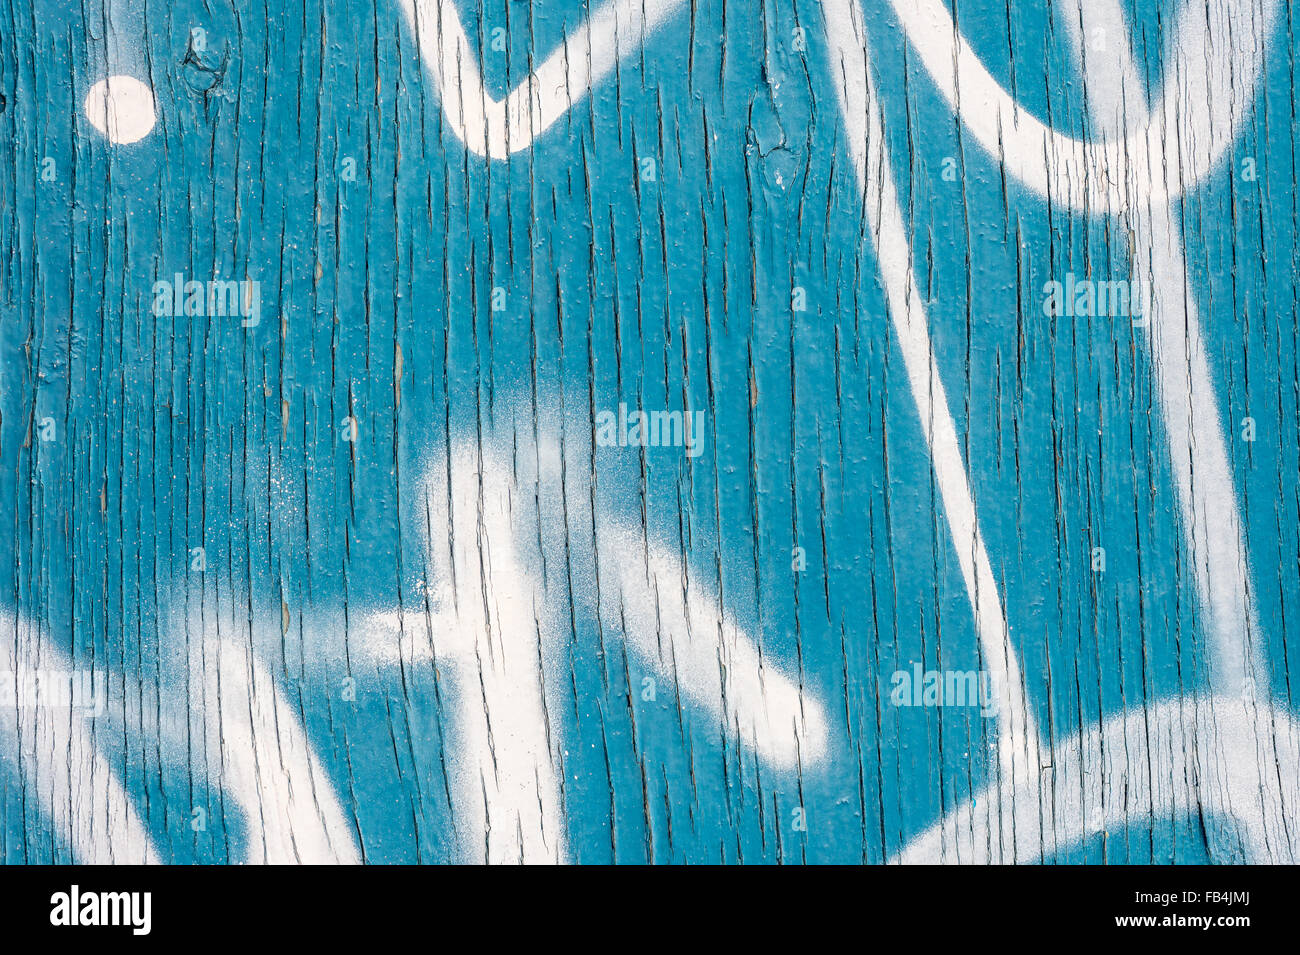 Vertical Lines of Peeling blue paint on wooden wall, with white spray paint markings Stock Photo